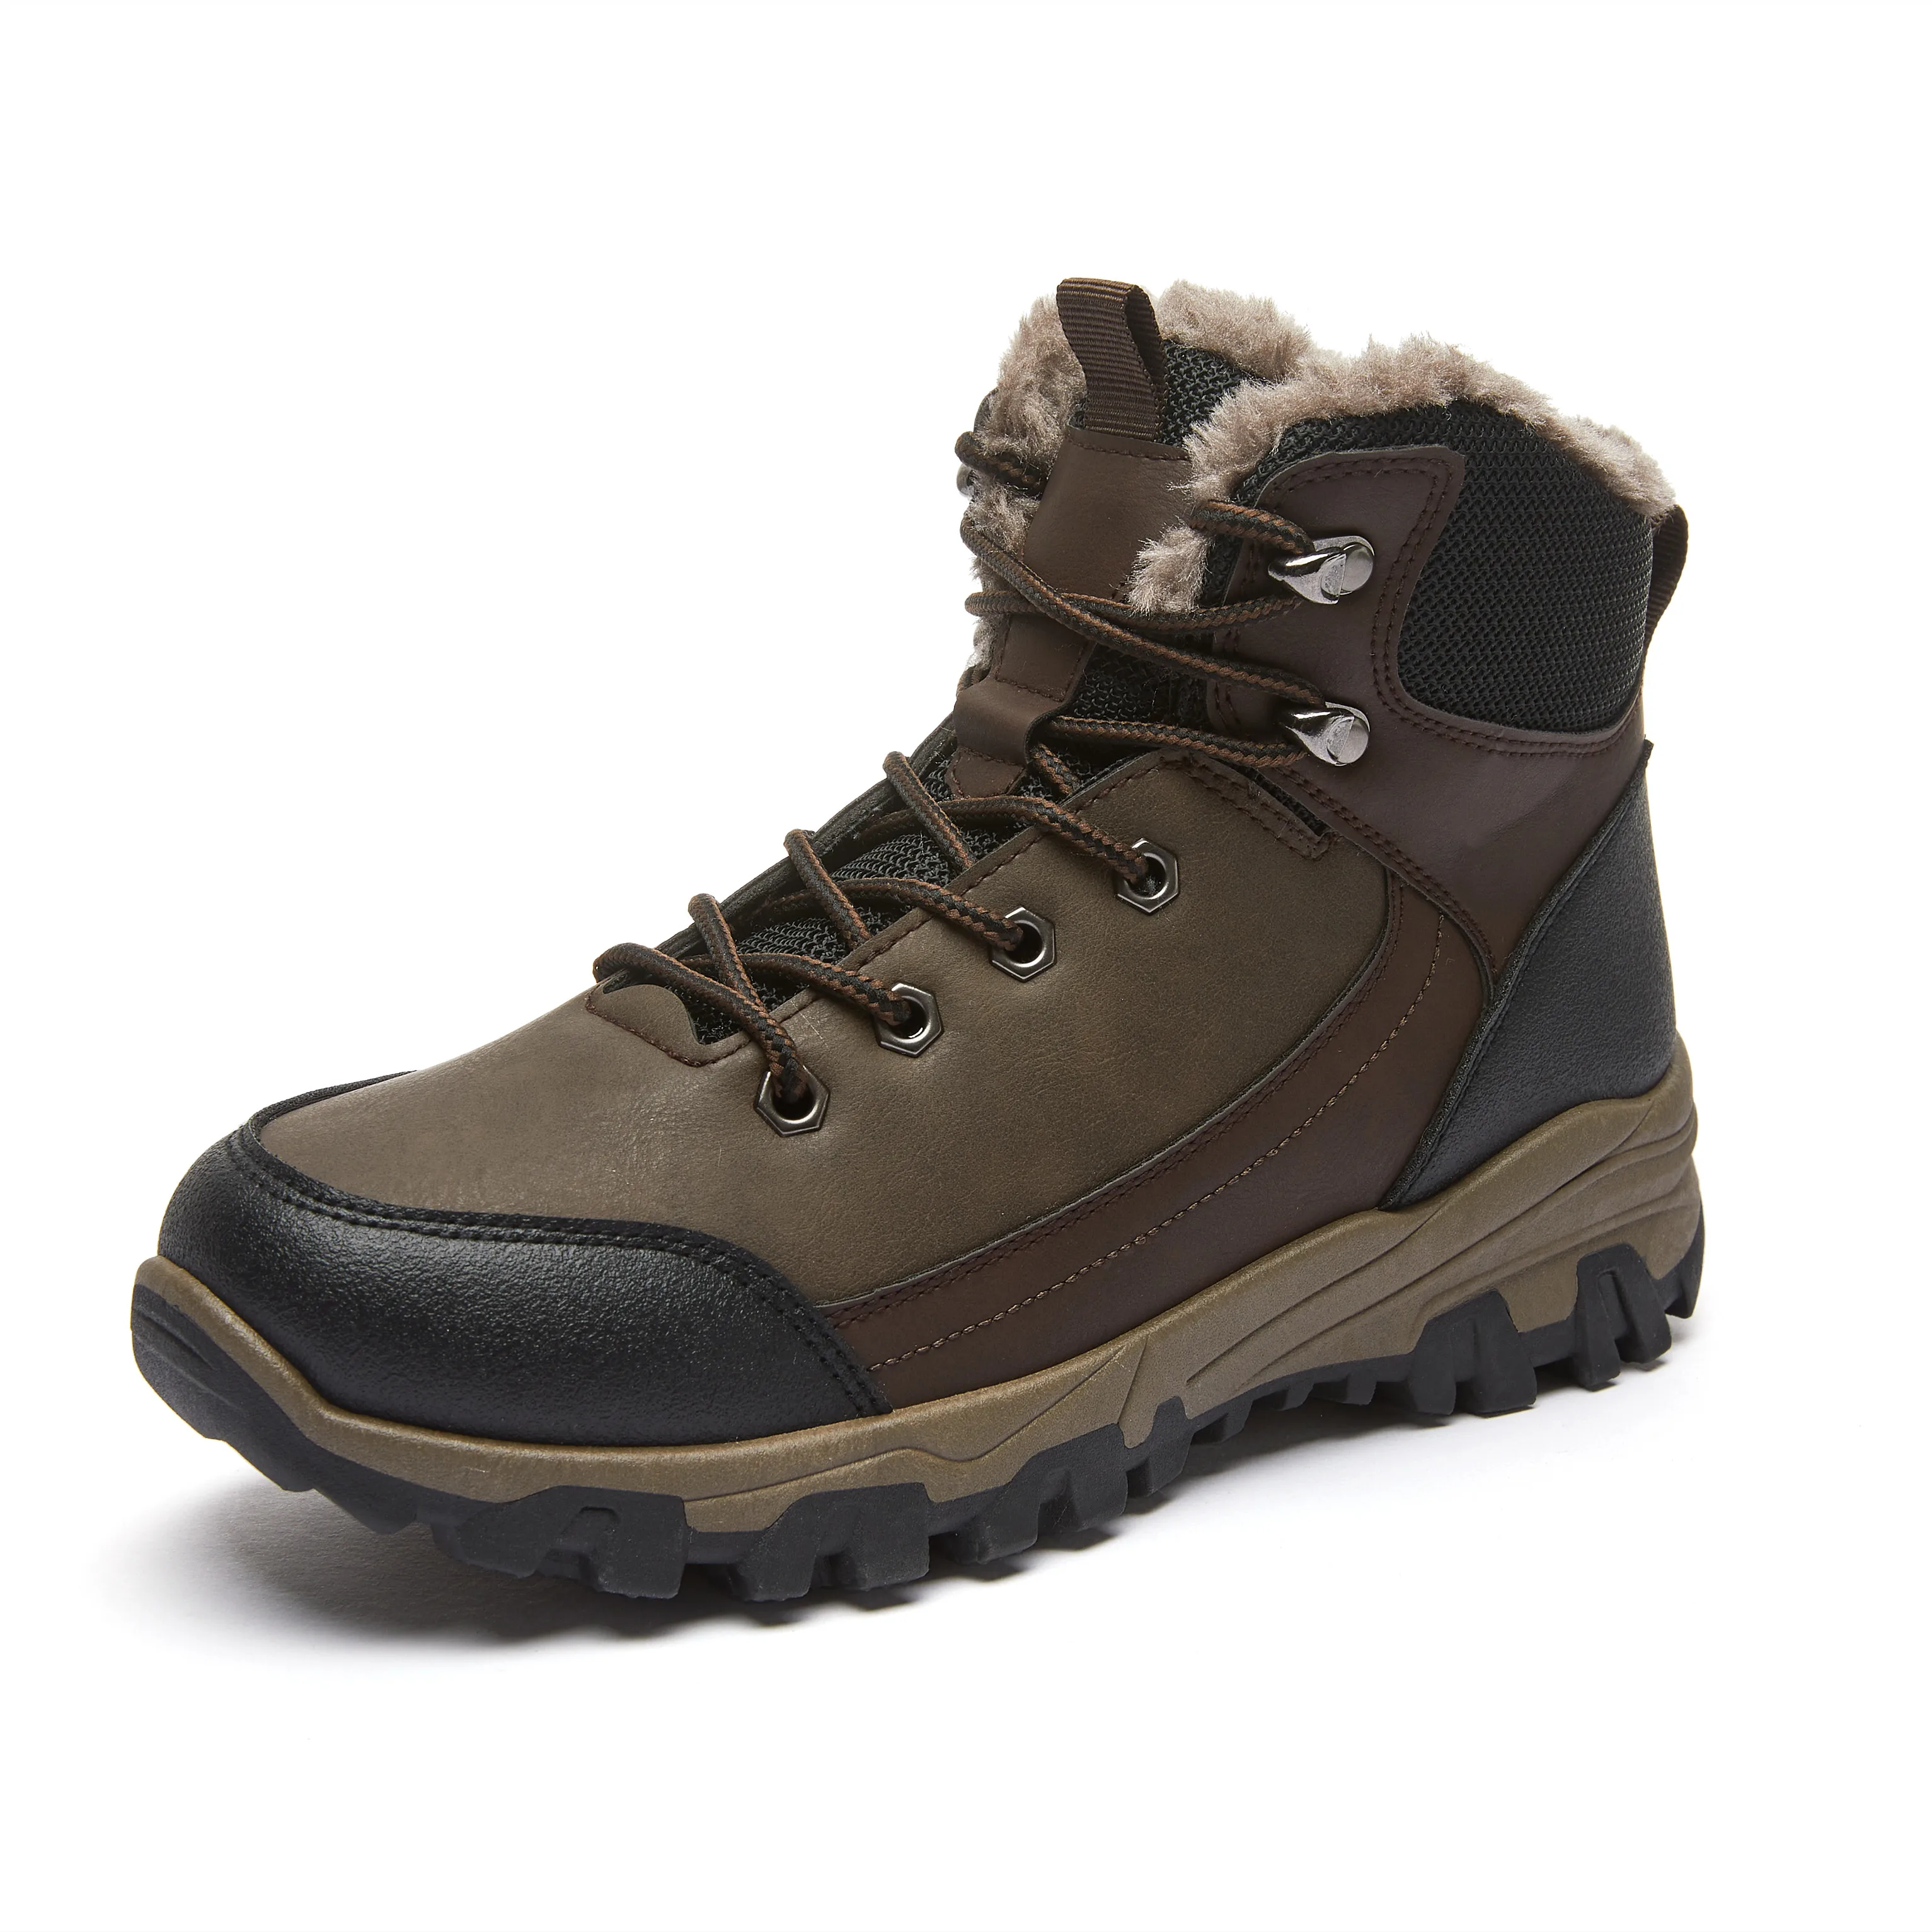 Customized hot selling high-quality fashion waterproof outdoor men's snow hiking boots